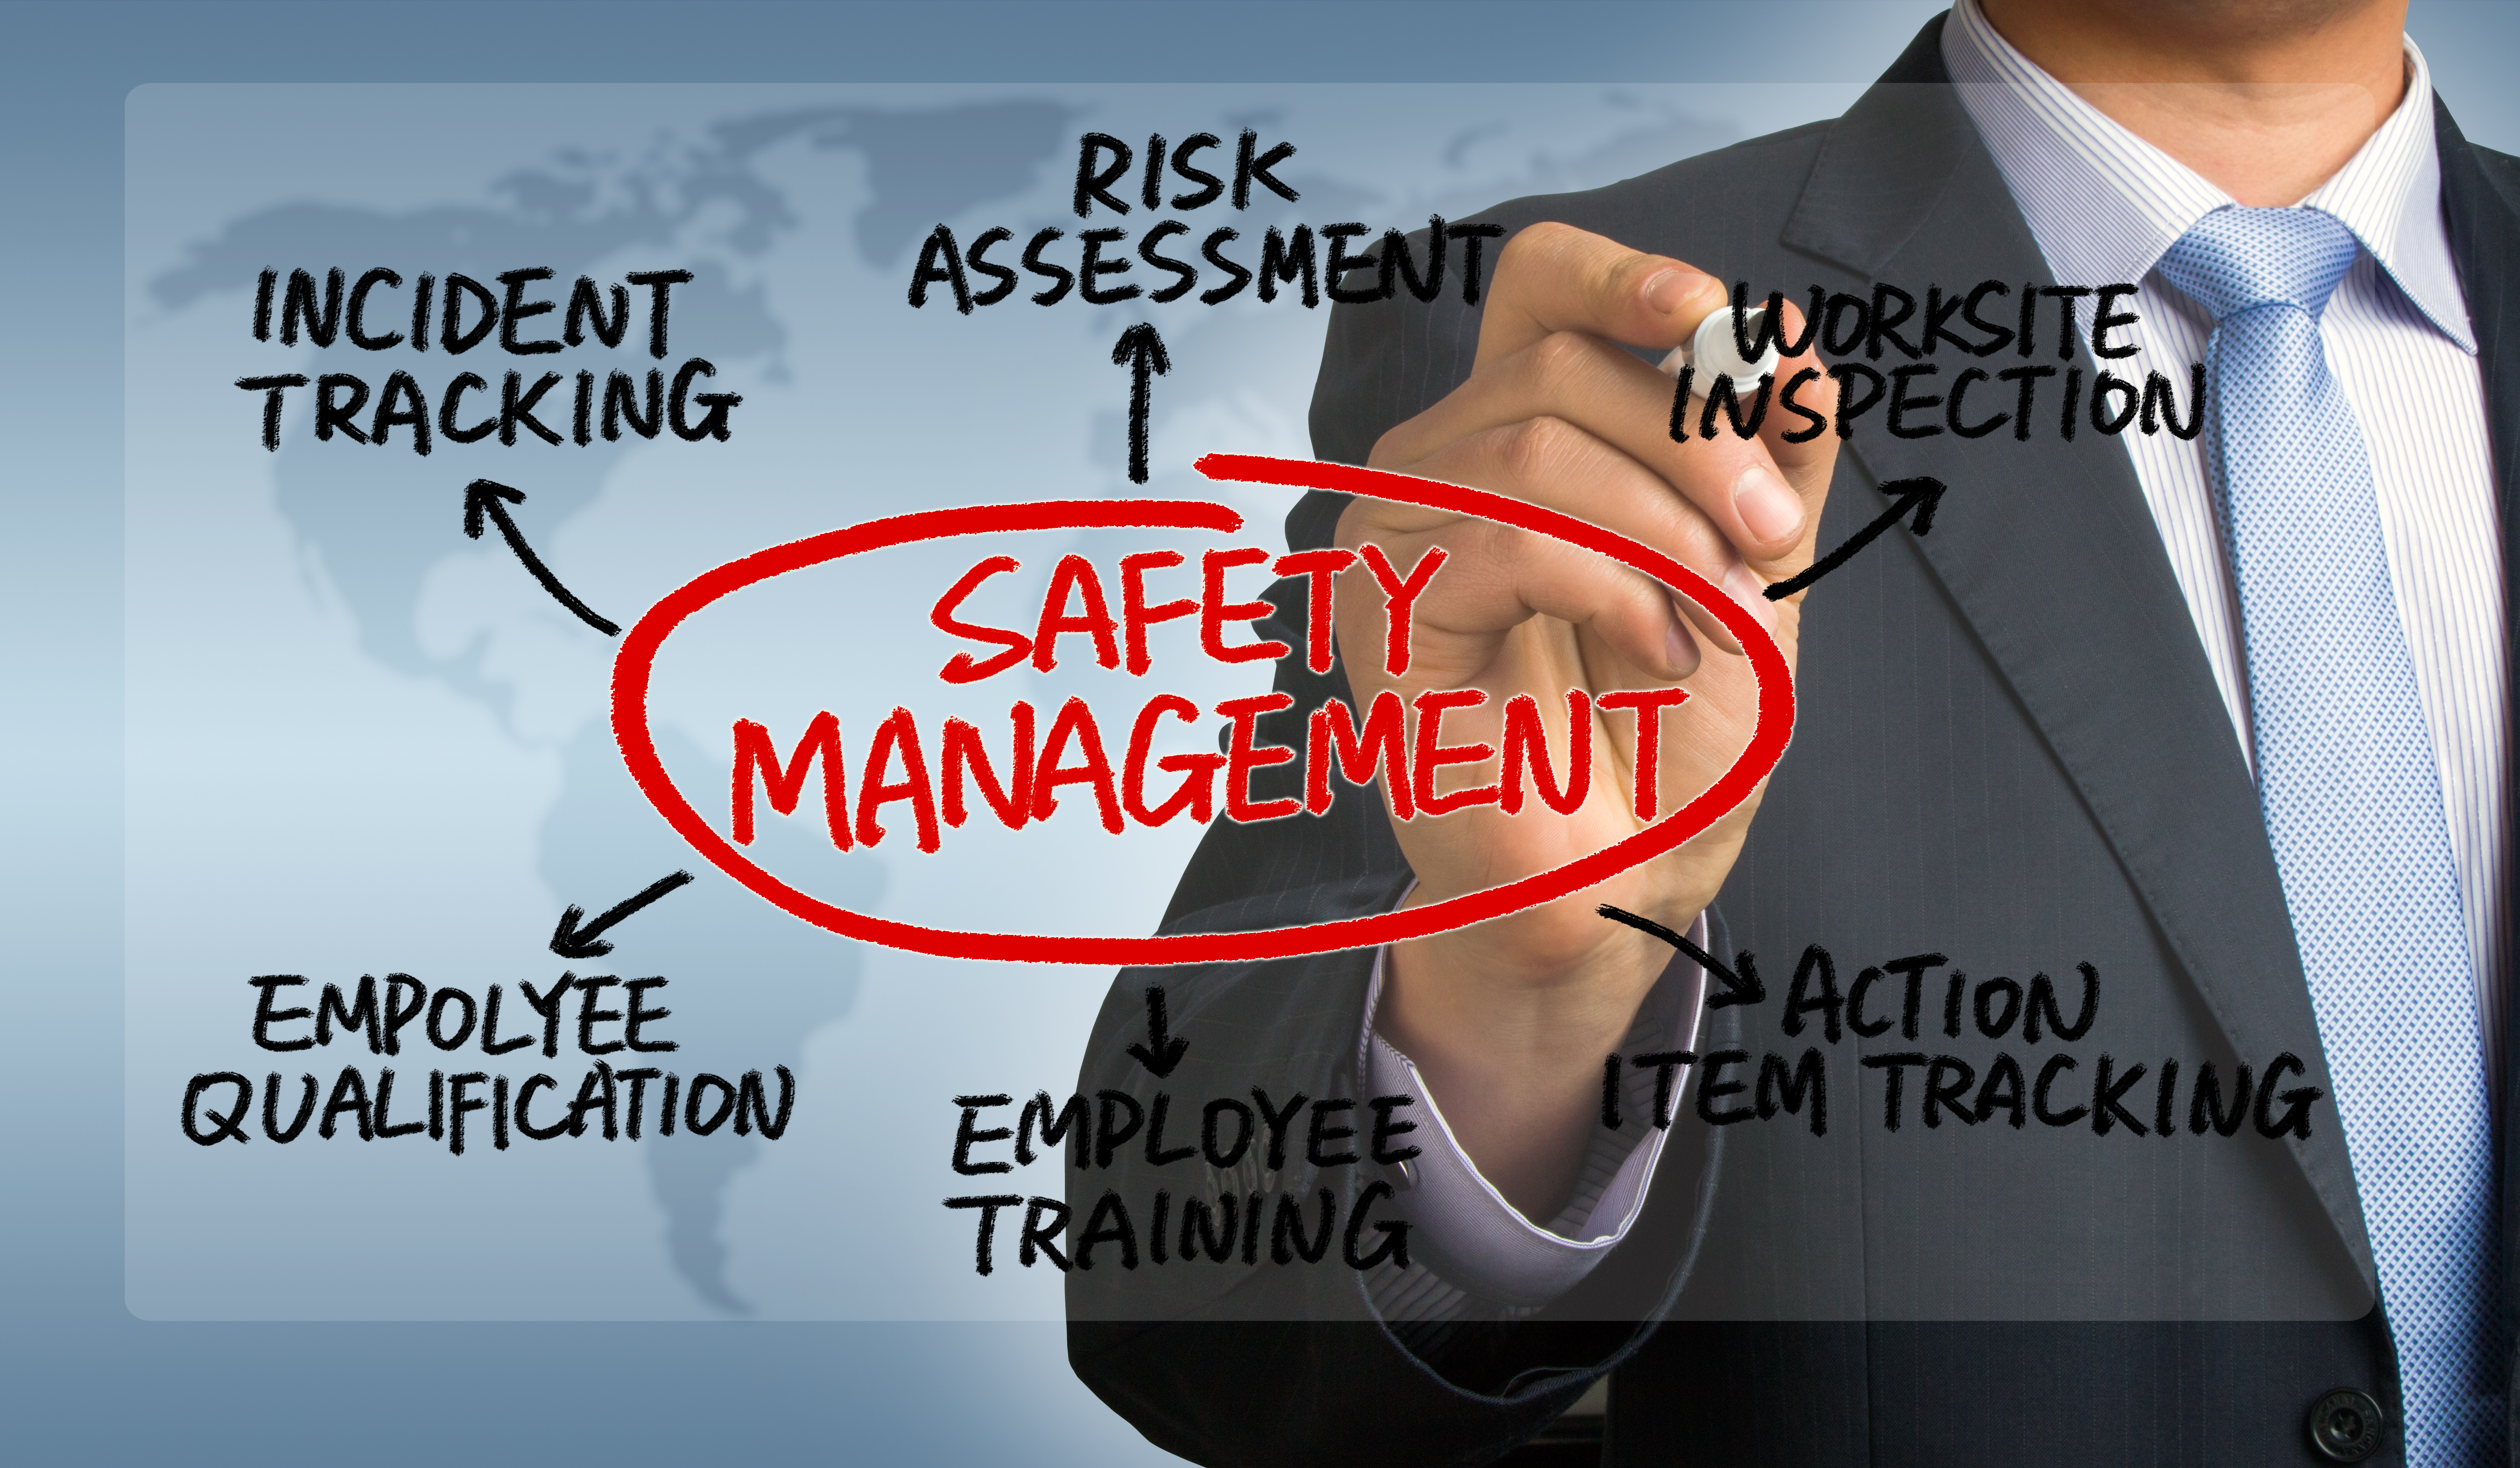 Reduce Incidents and Increase Workplace Safety using Technology